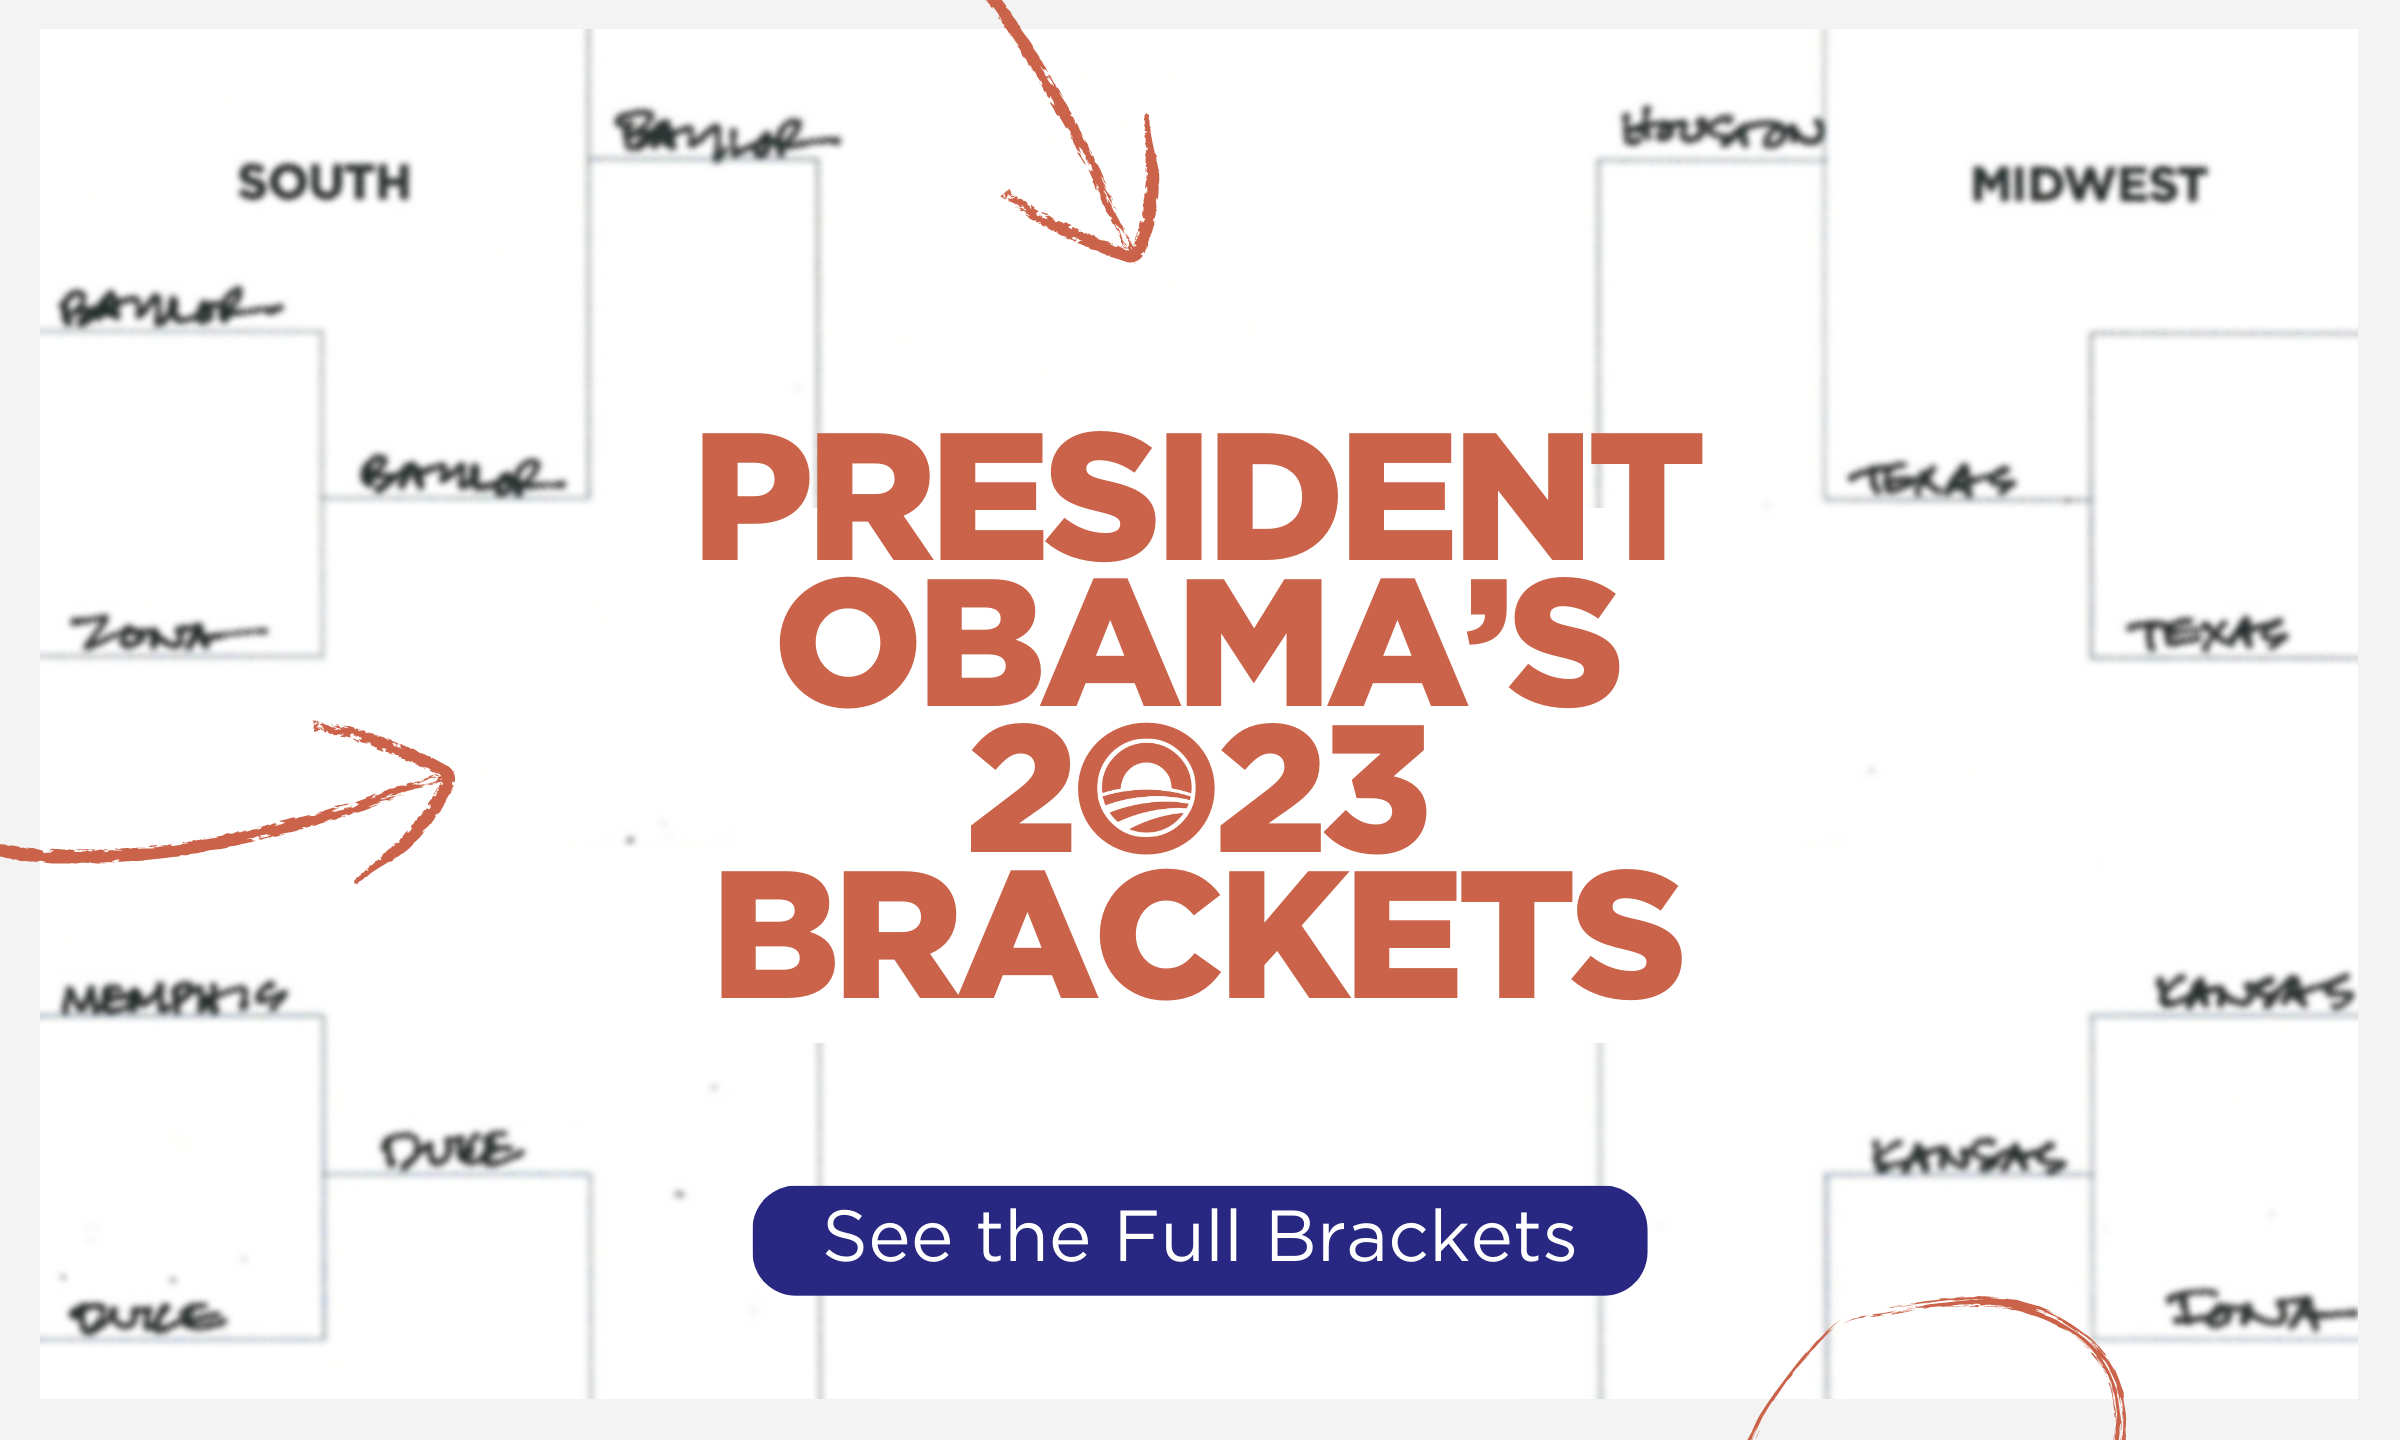 A graphic of a preview of President Obama’s March Madness tournament bracket picks. It reads “President Obama’s 2023 Brackets” in all caps and is followed by a button that reads “See the Full Brackets” which links to the March Madness landing page on obama.org.